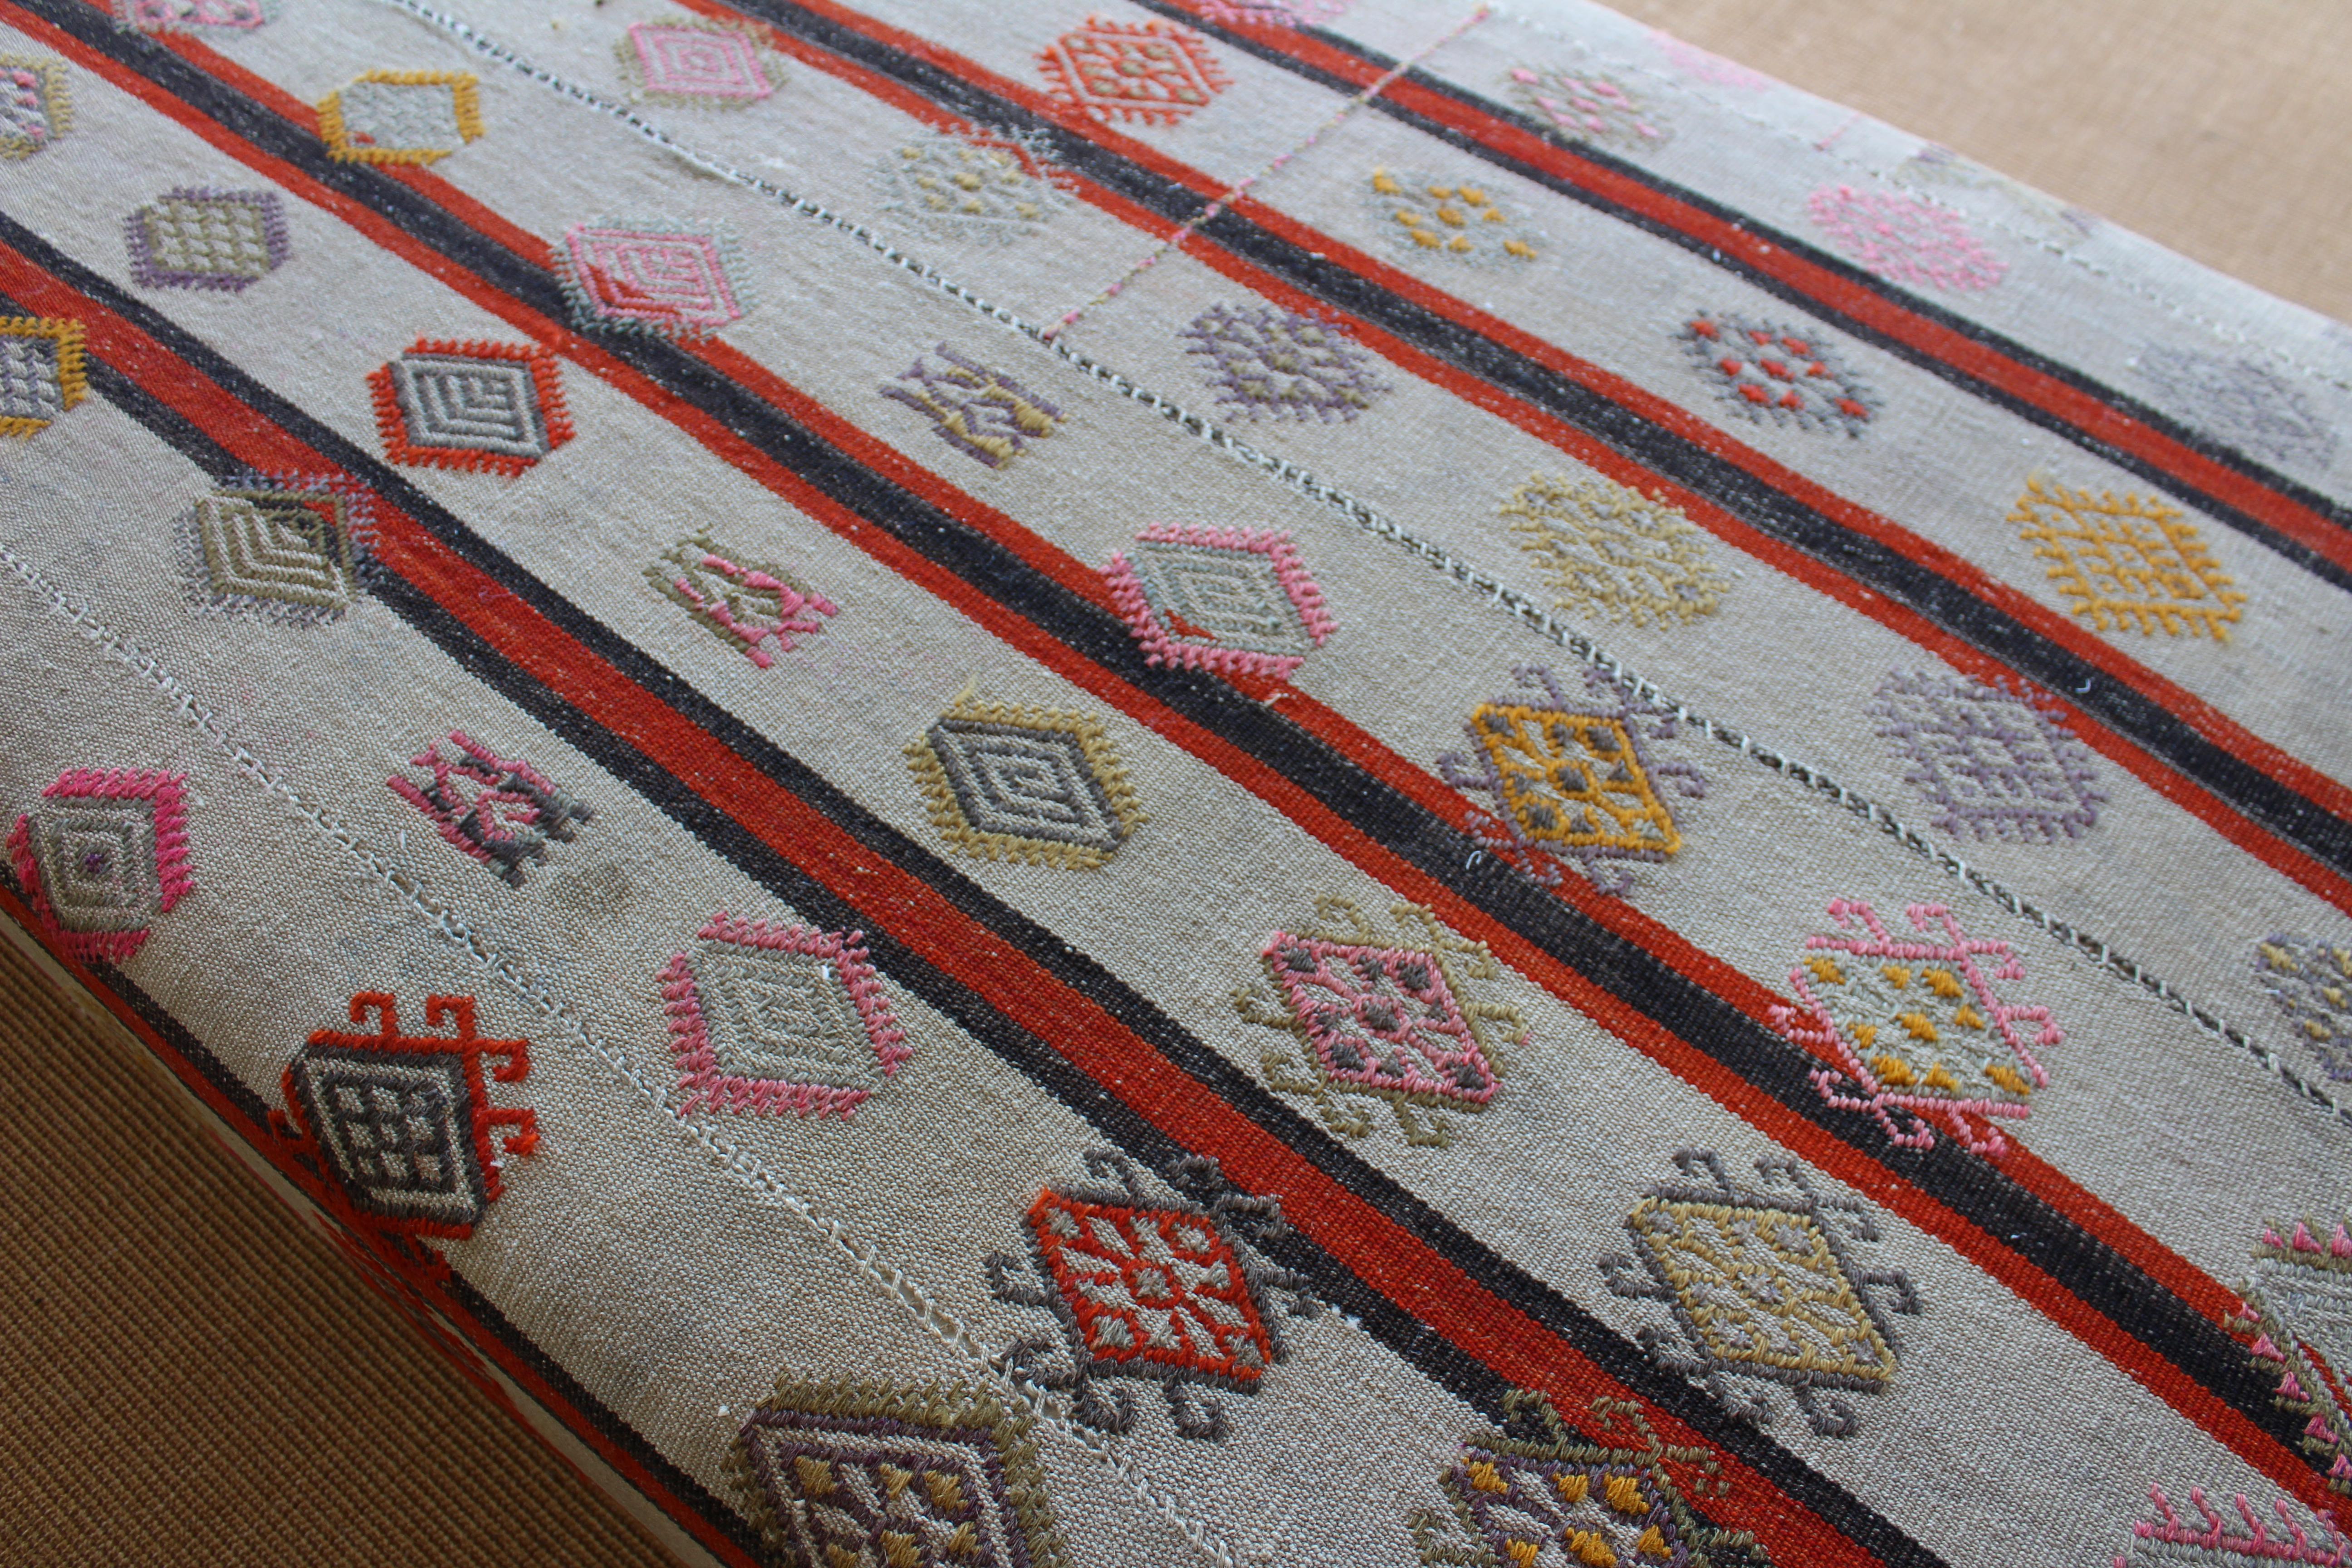 Ottoman Upholstered in a Vintage Rug 2